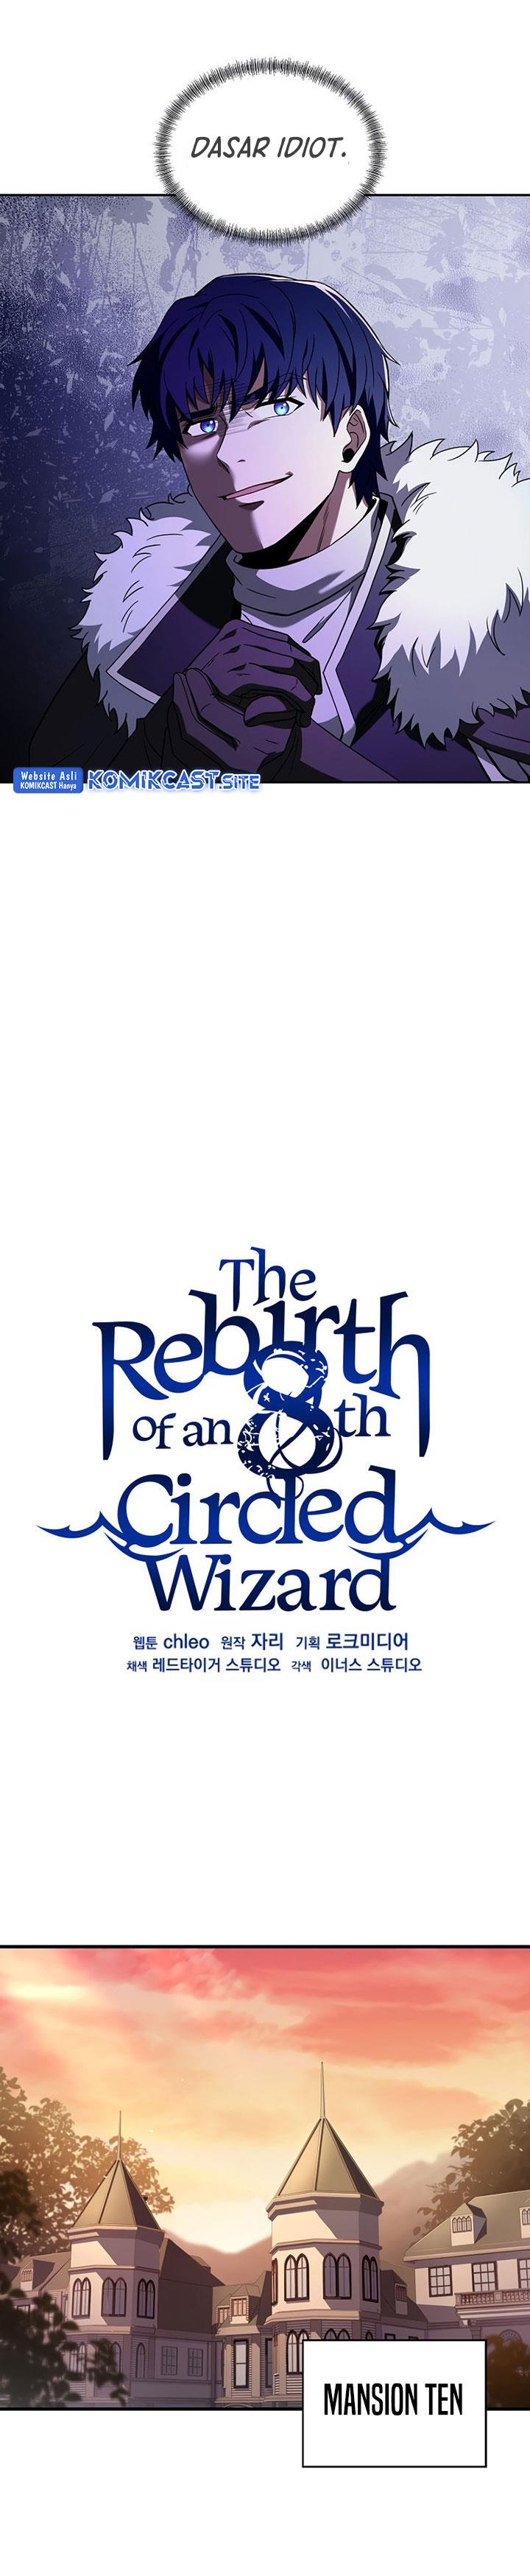 Rebirth of the 8-Circled Mage Chapter 121